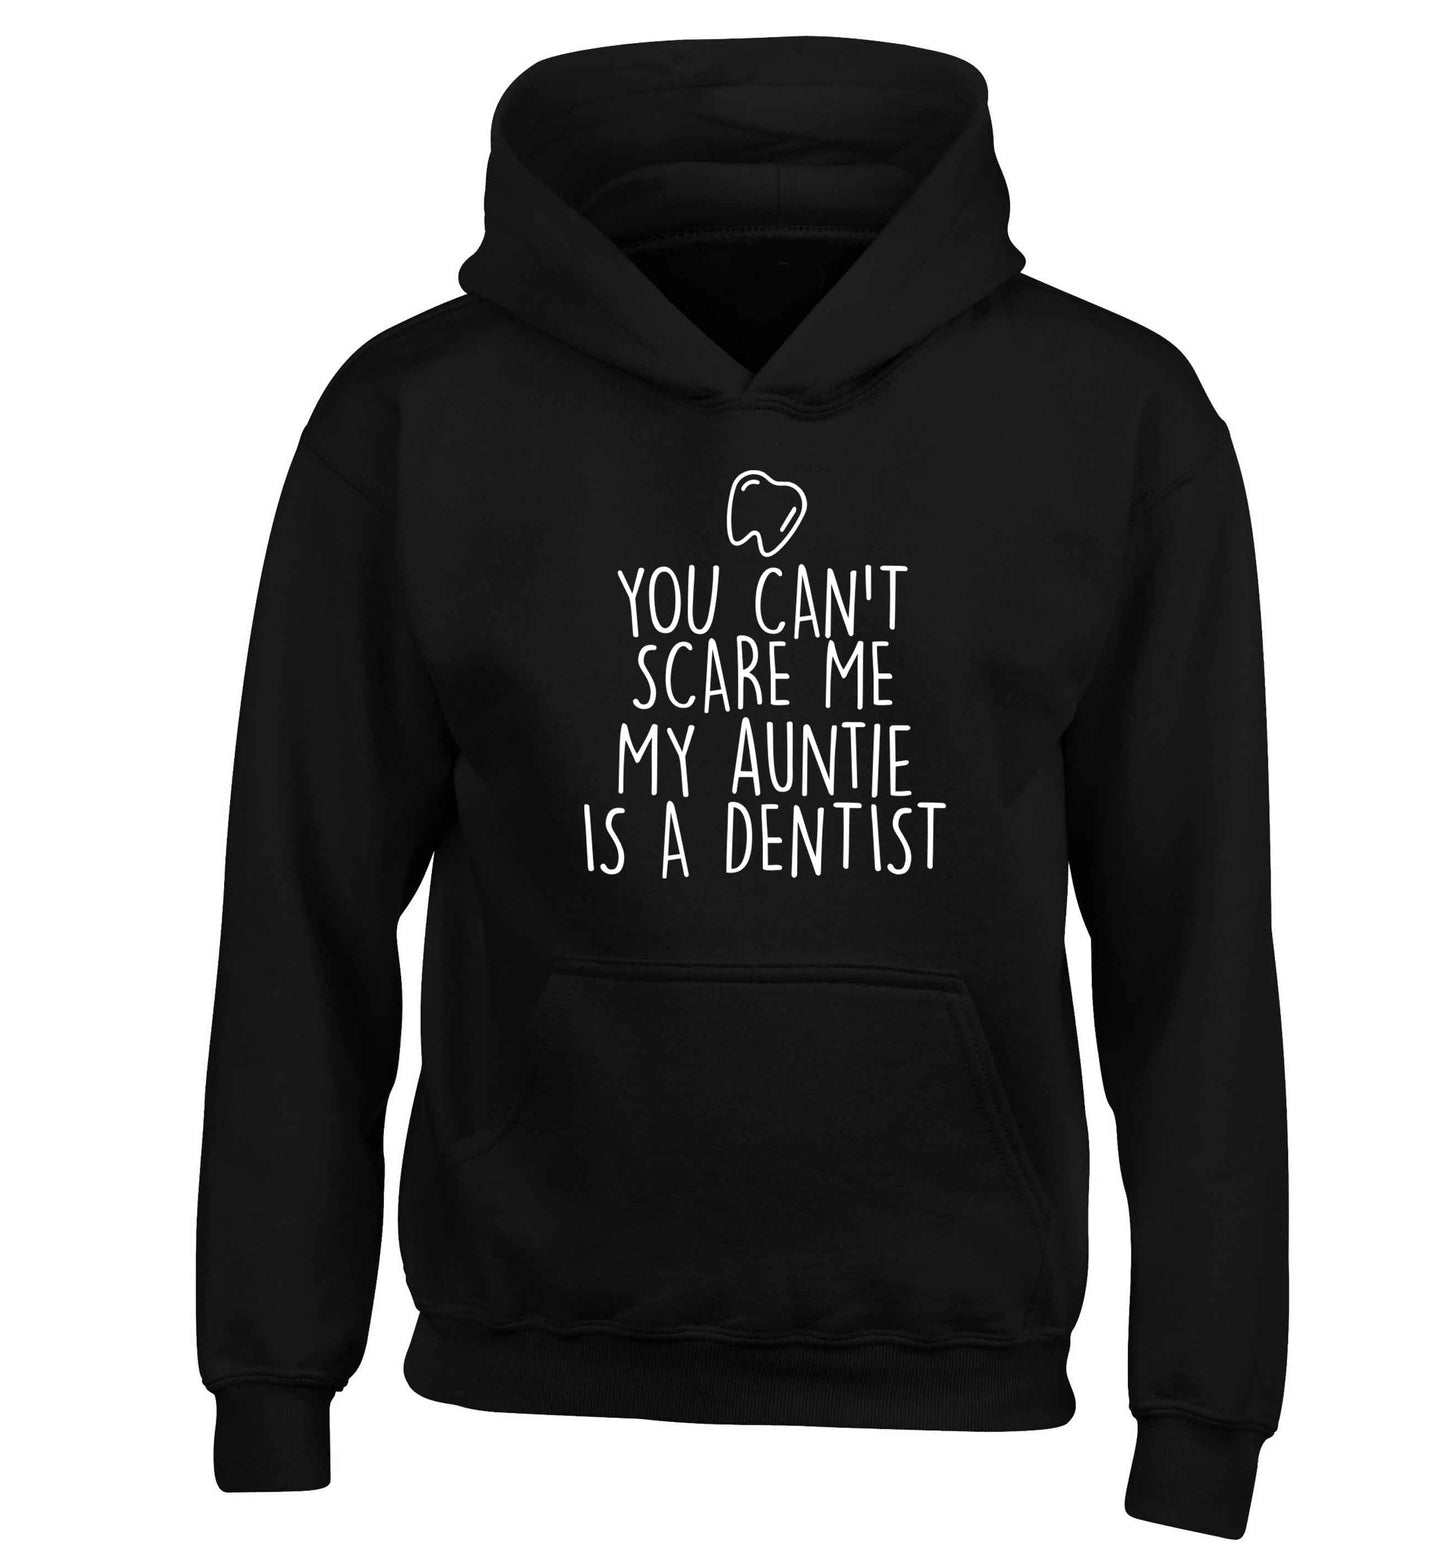 You can't scare me my auntie is a dentist children's black hoodie 12-13 Years